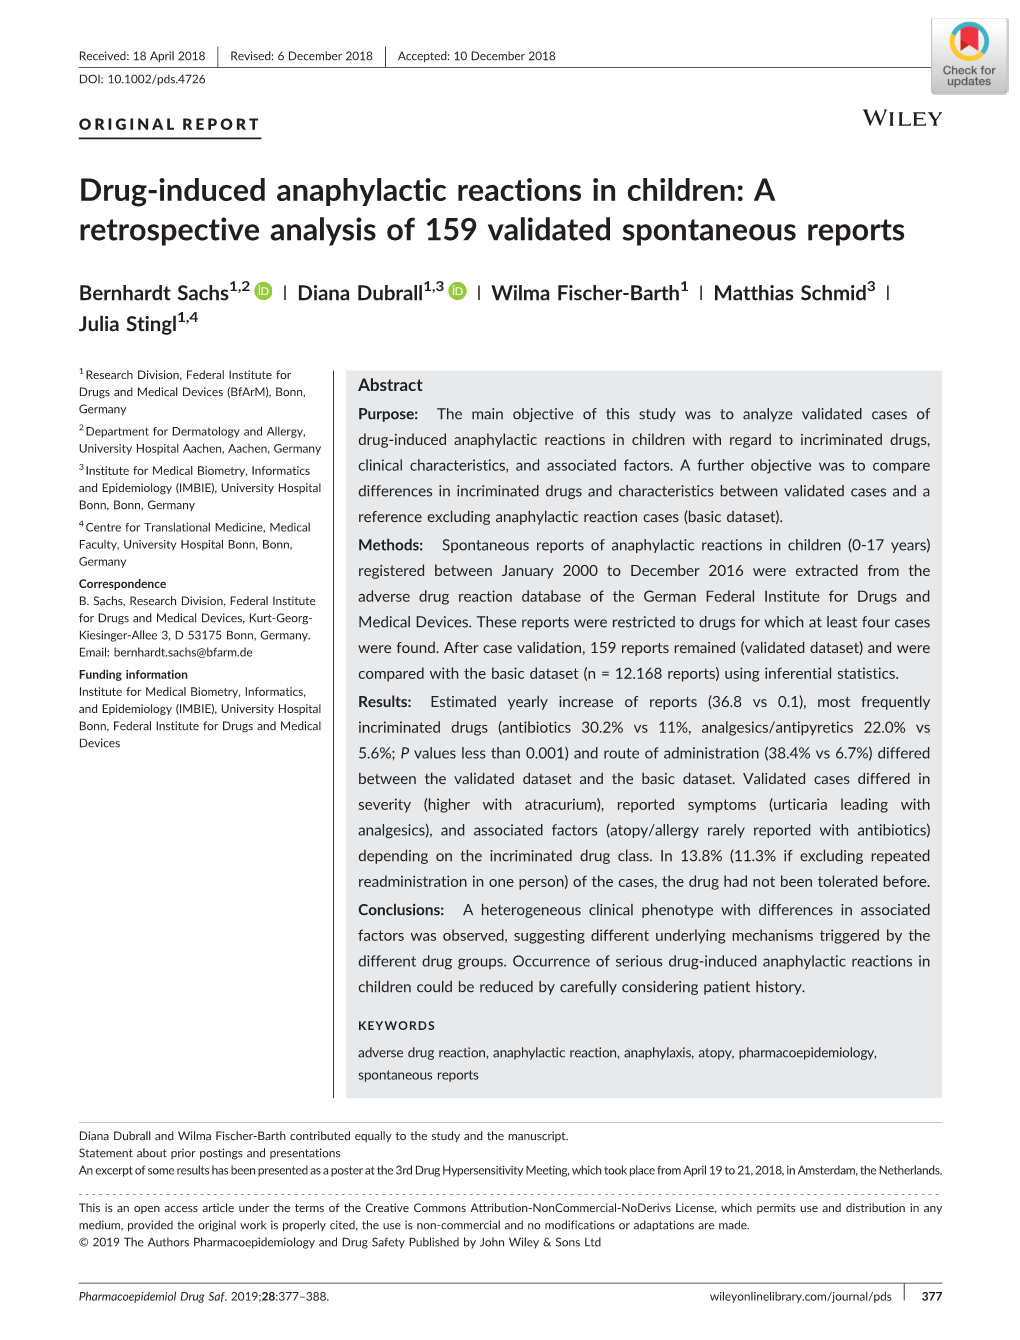 Drug‐Induced Anaphylactic Reactions in Children: a Retrospective Analysis of 159 Validated Spontaneous Reports